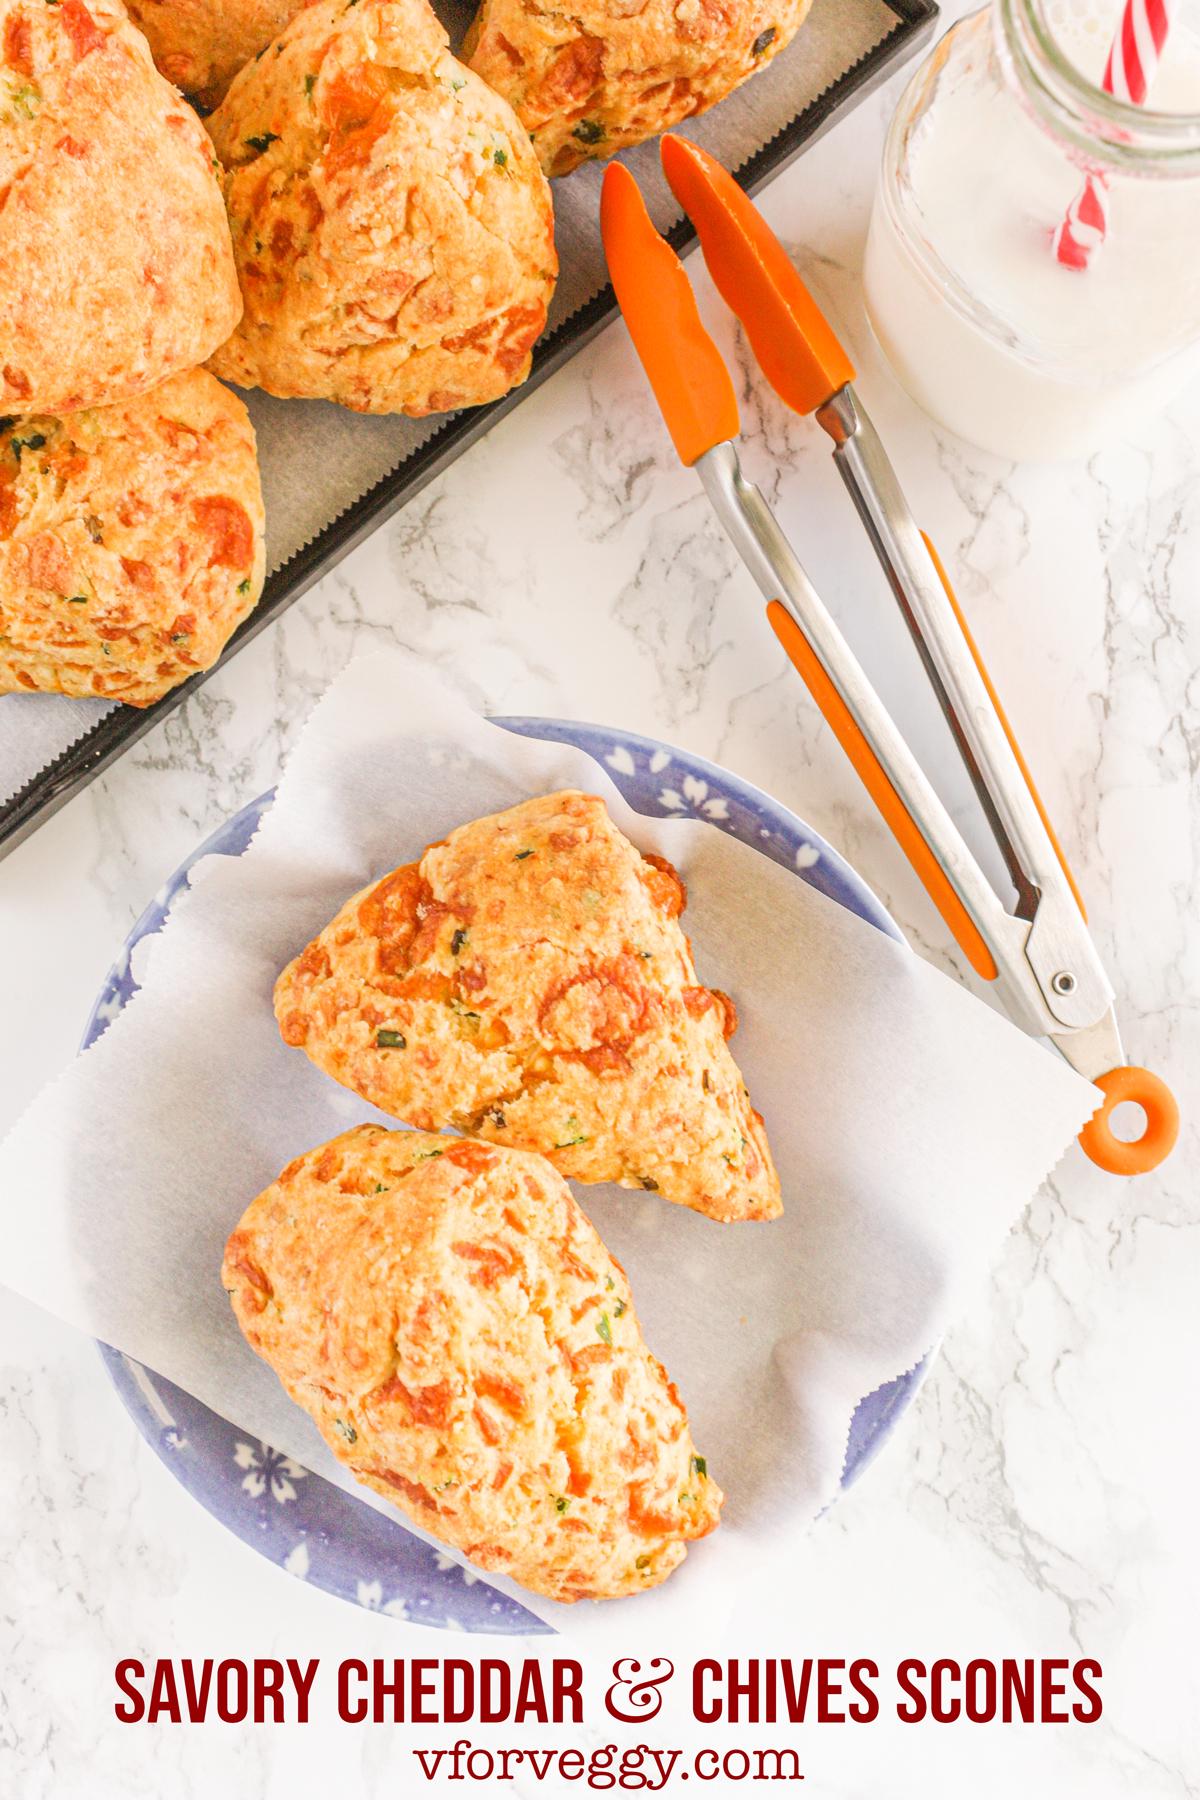 Savory Cheddar & Chives Scones